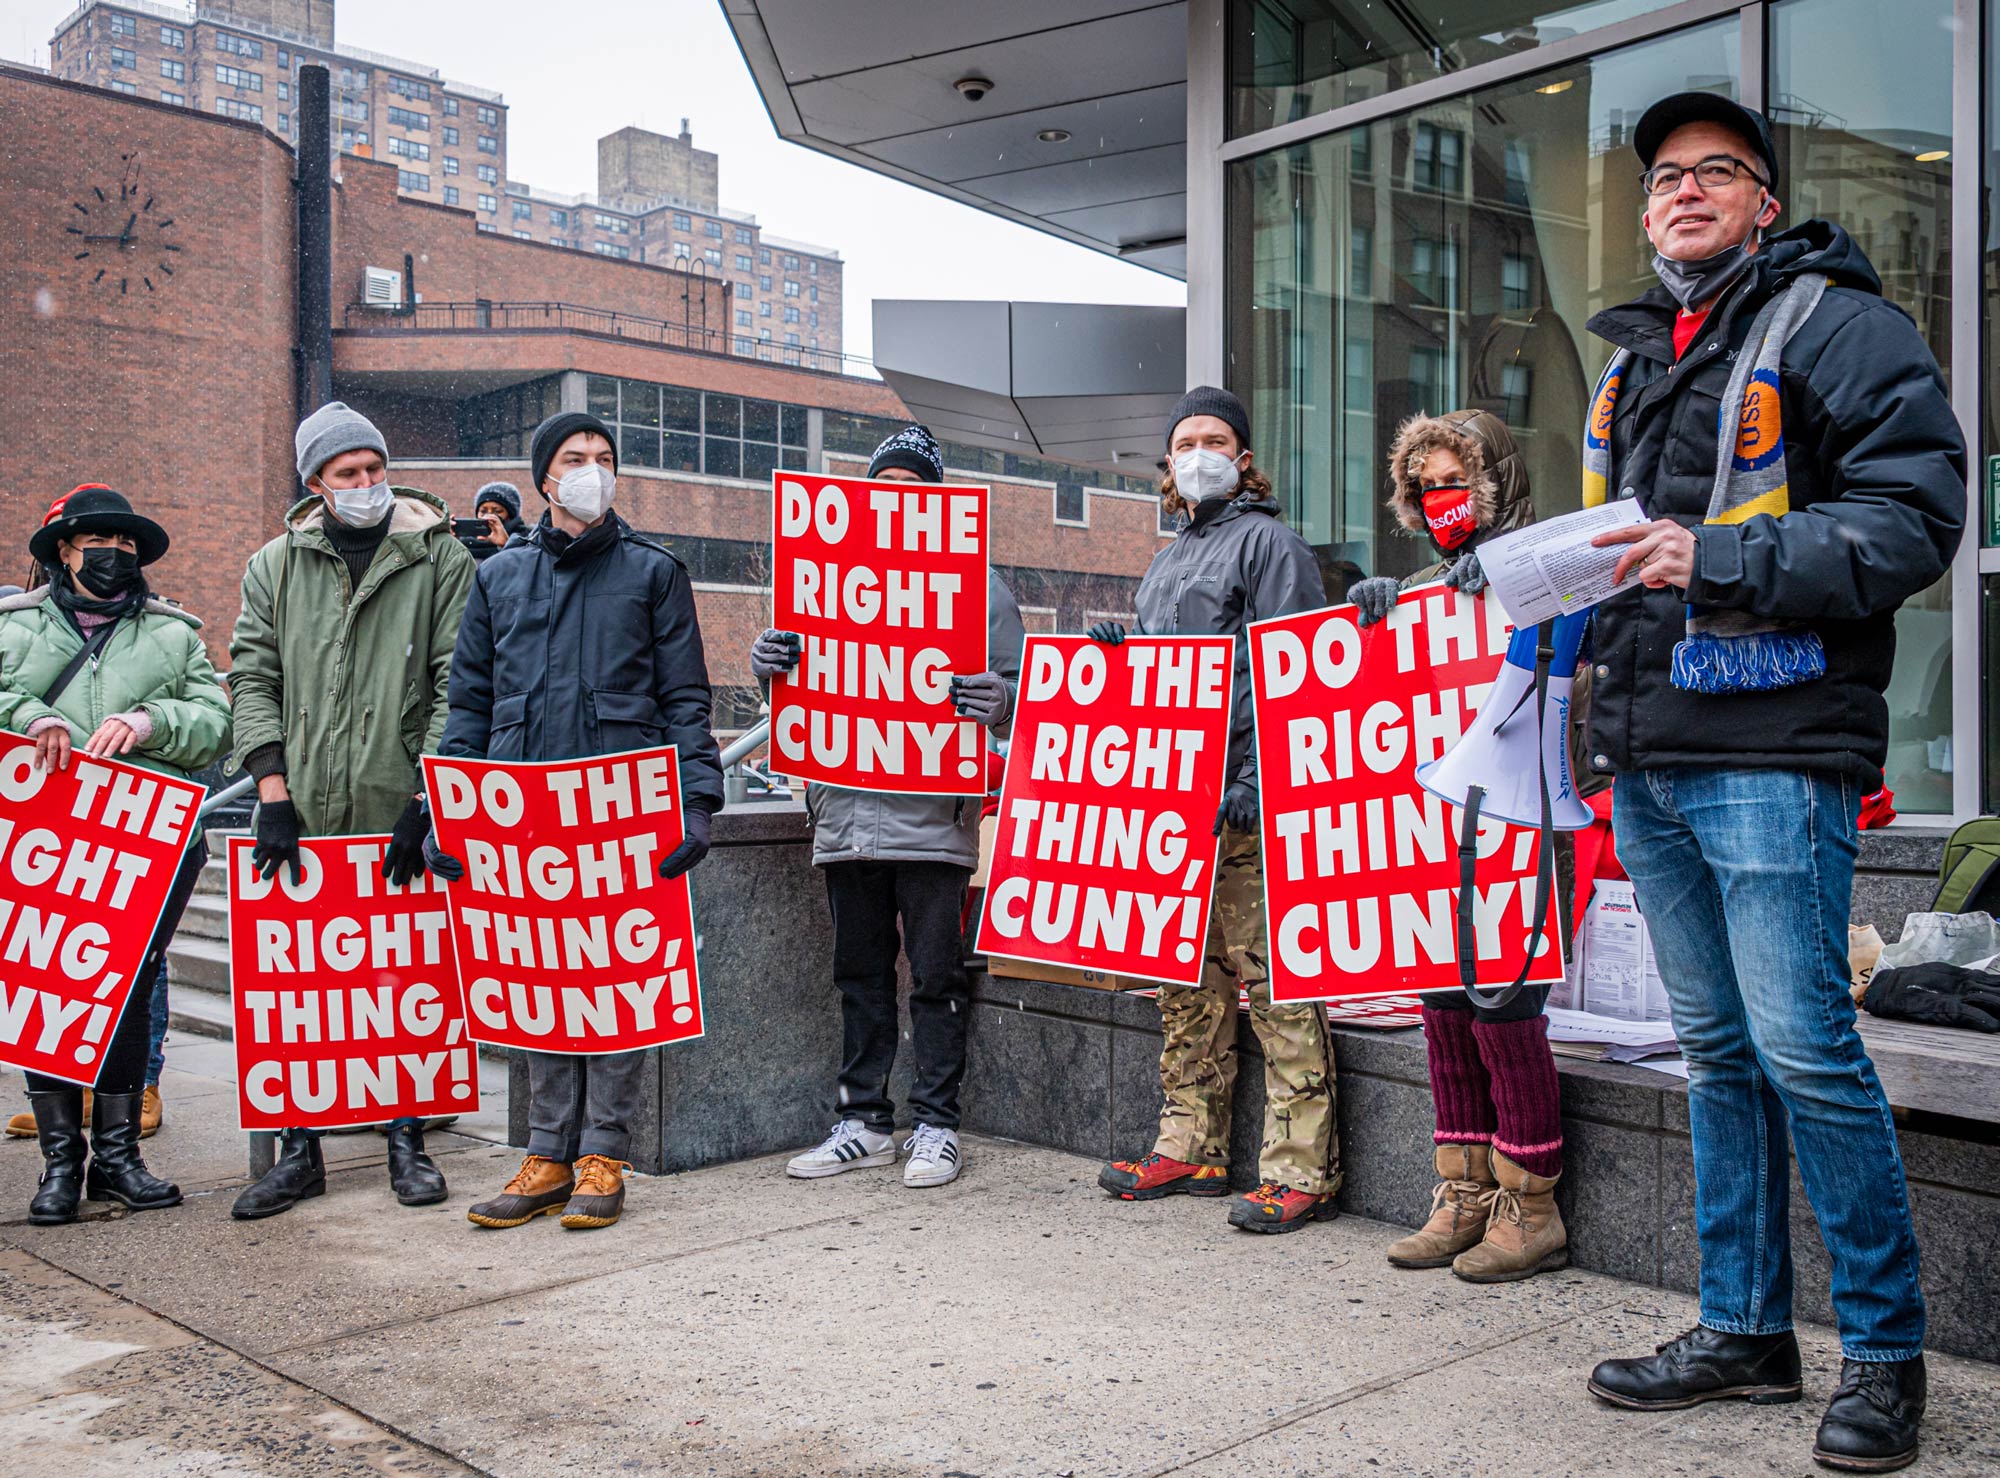 At a rally outside Medgar Evers College in February, members urge caution in campus reopening. (Credit: Erik McGregor)